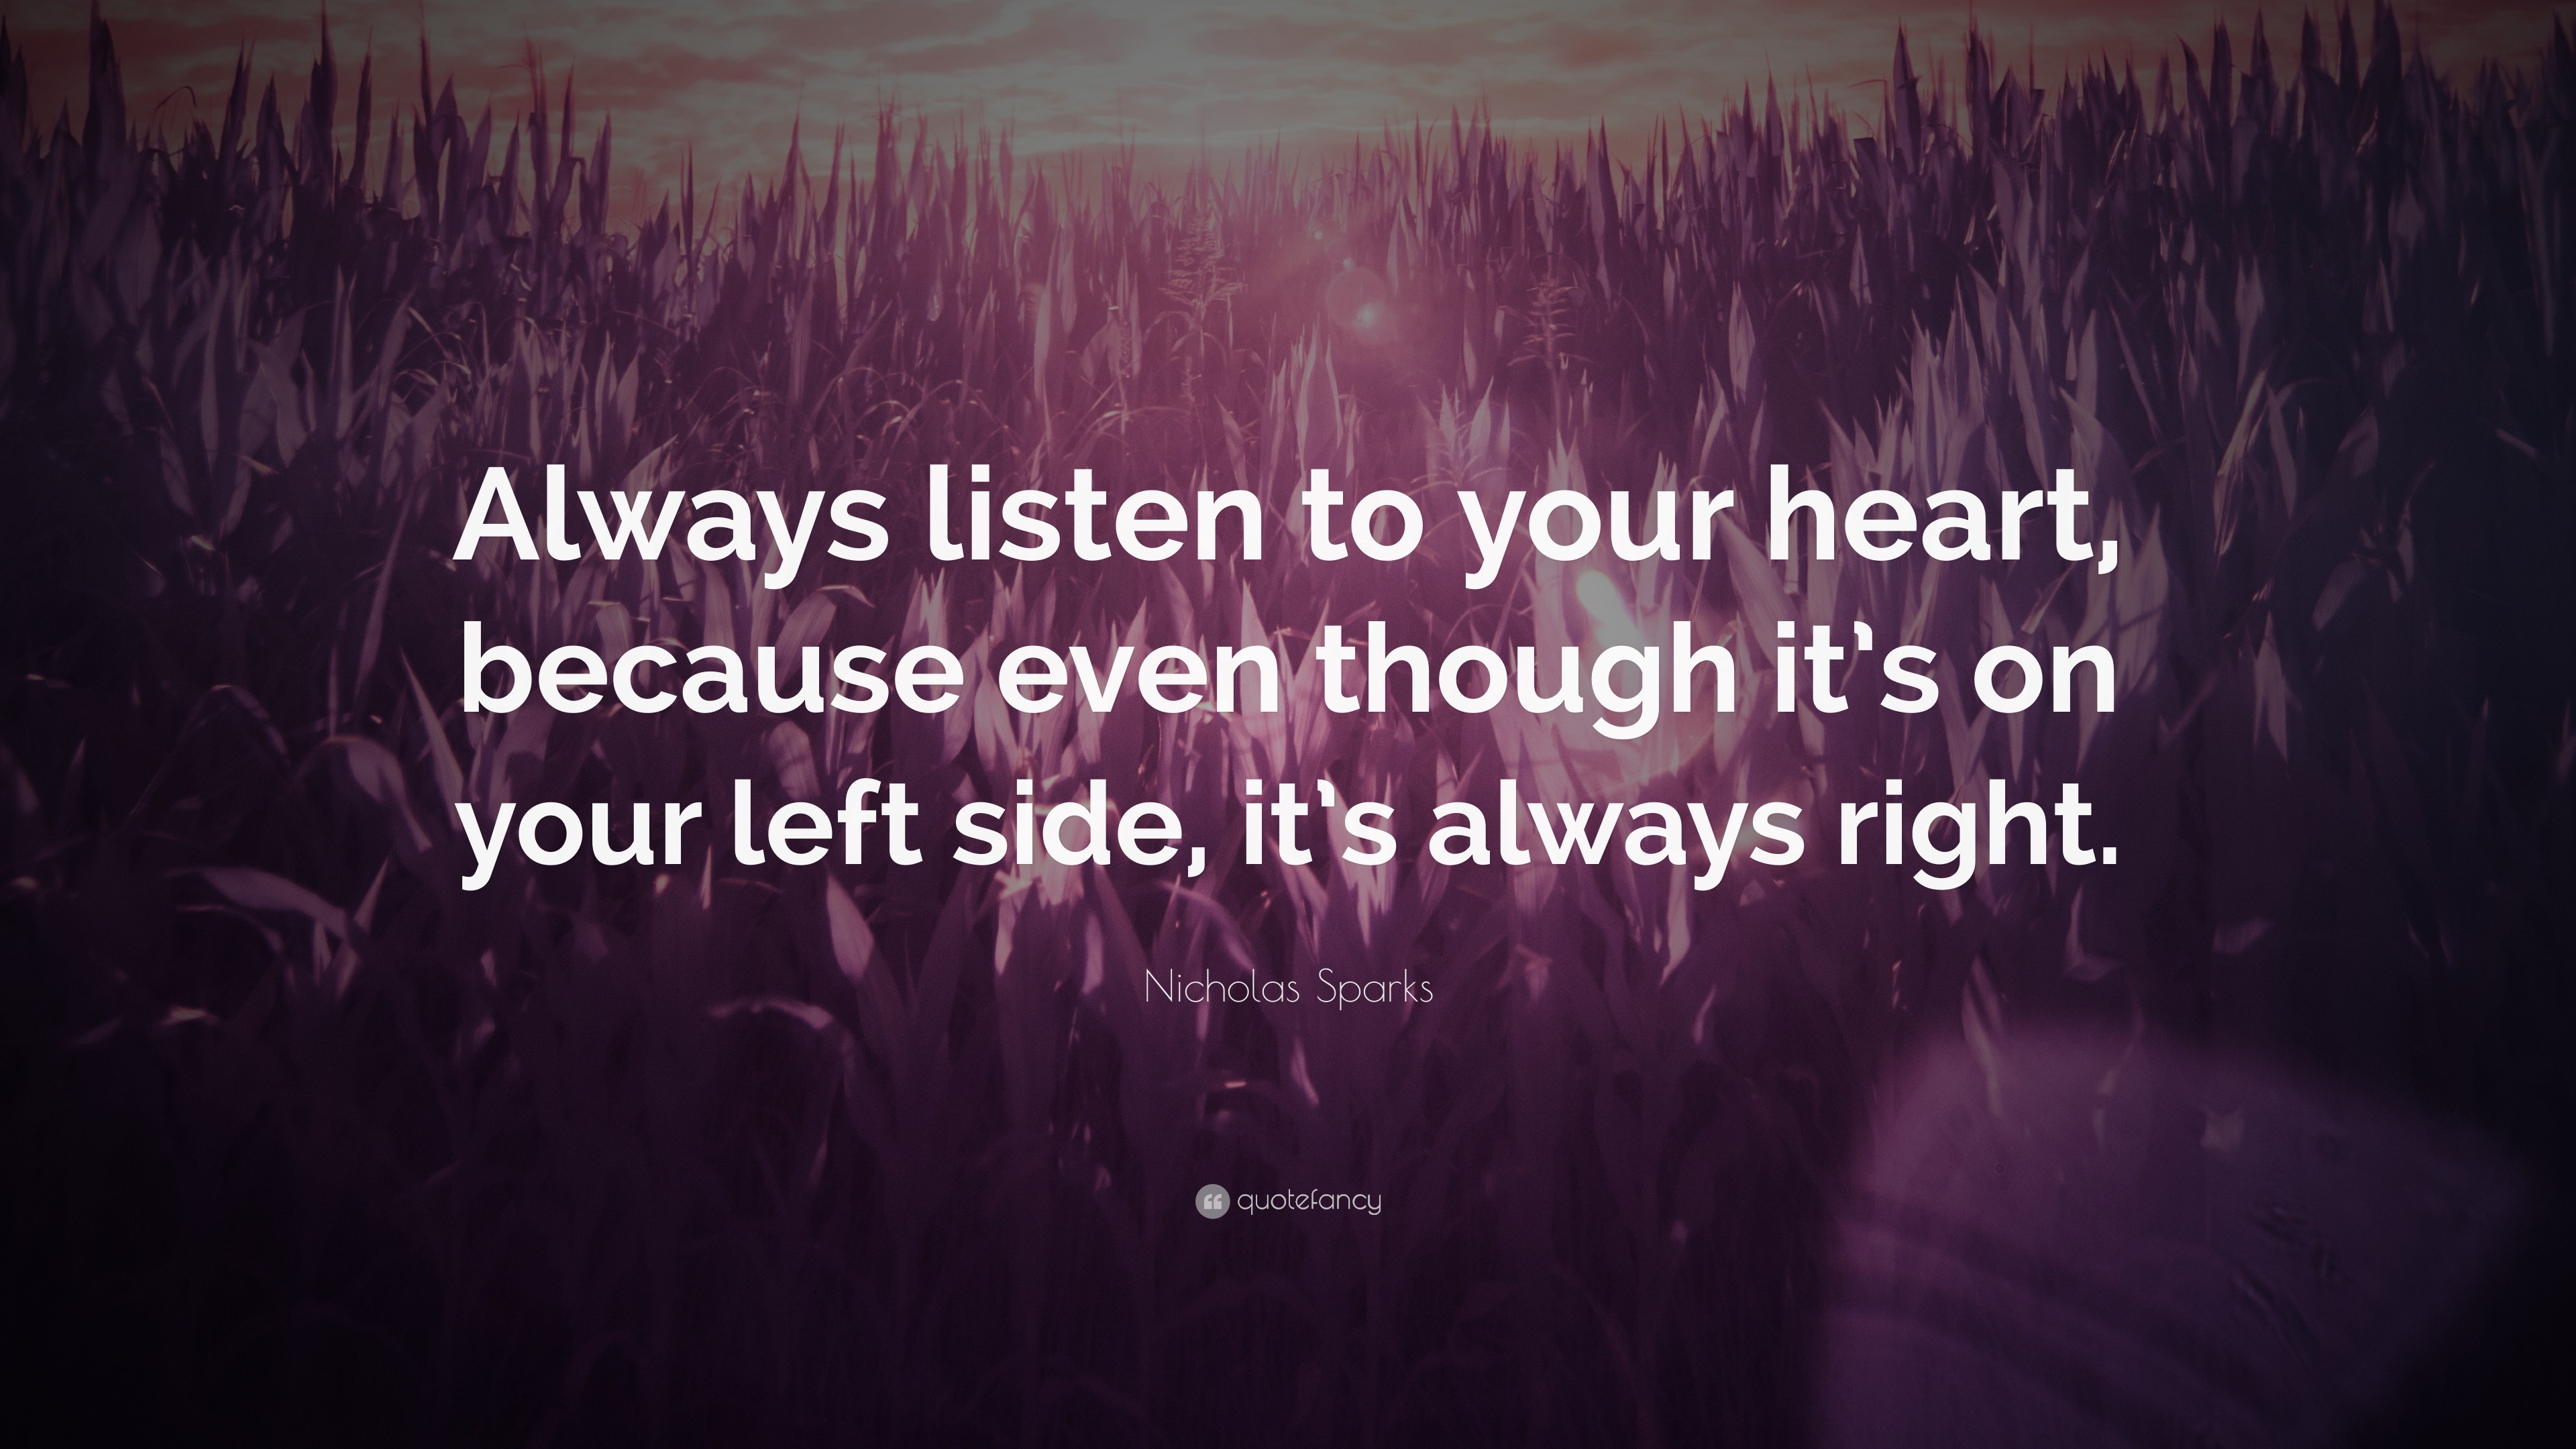 Nicholas Sparks Quote Always Listen To Your Heart Because Even Though It S On Your Left Side It S Always Right 25 Wallpapers Quotefancy